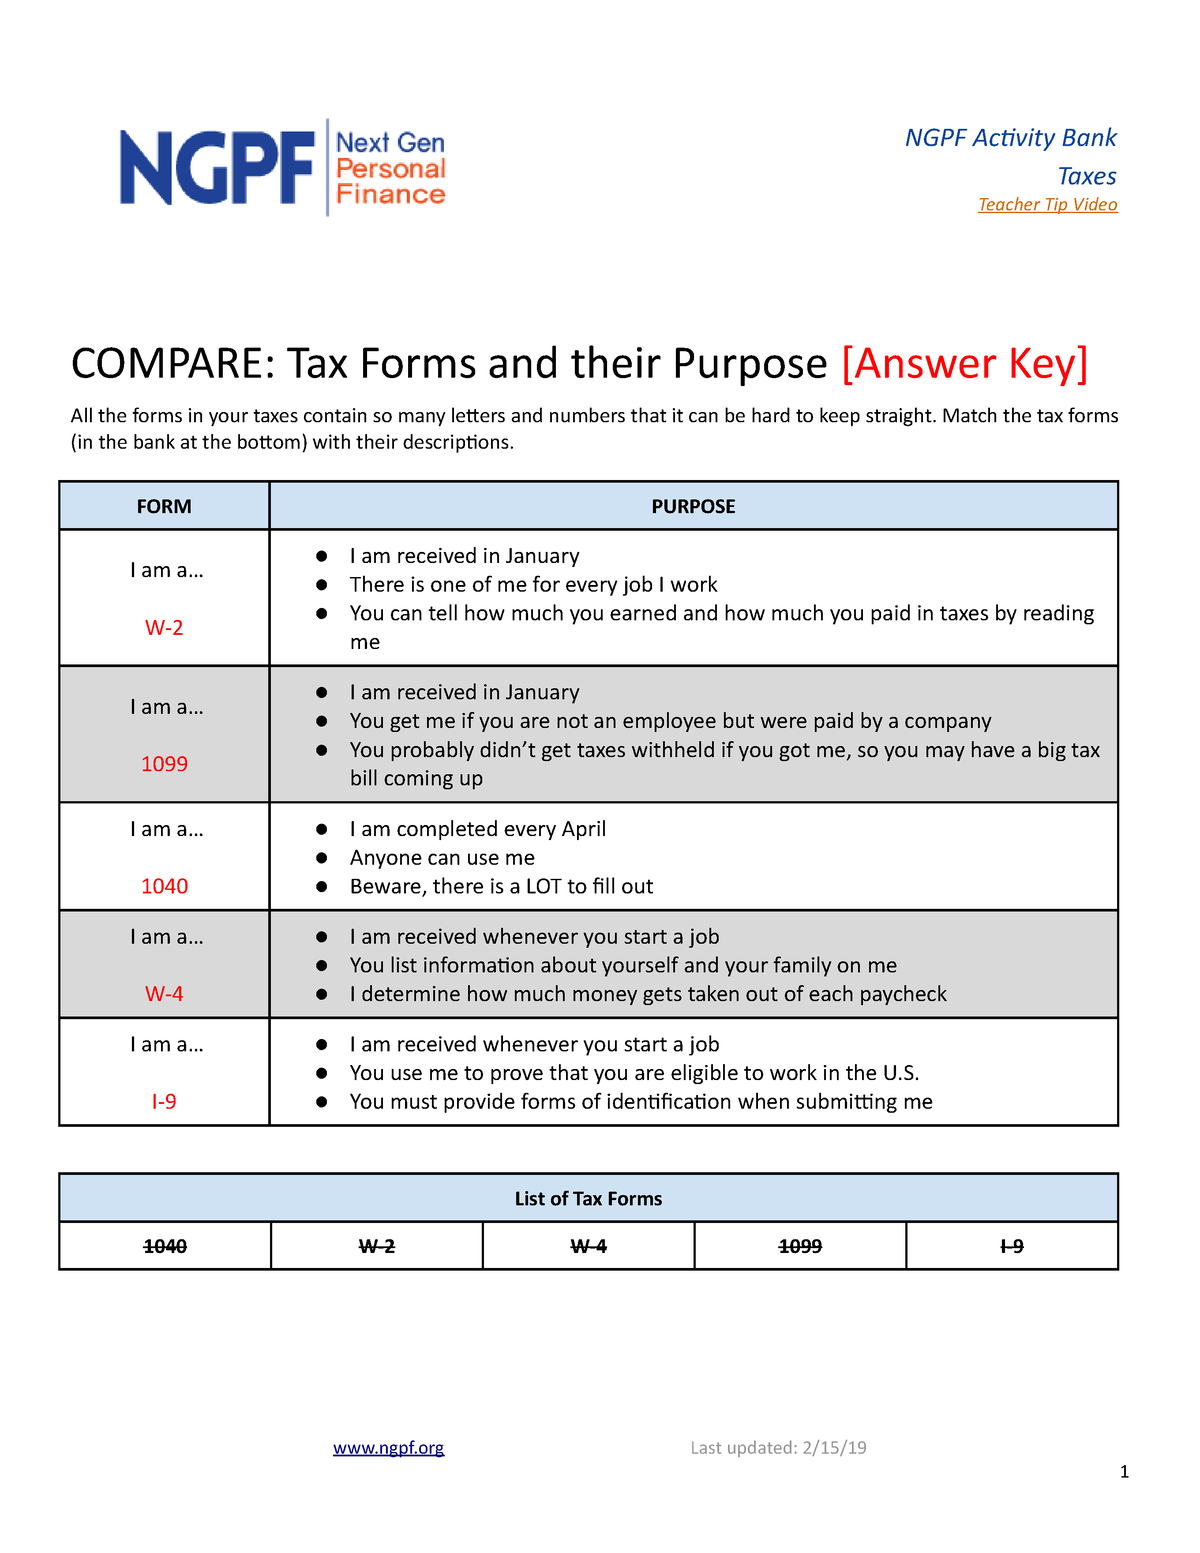 compare-tax-forms-and-their-purpose-answer-key-ngpf-activity-bank